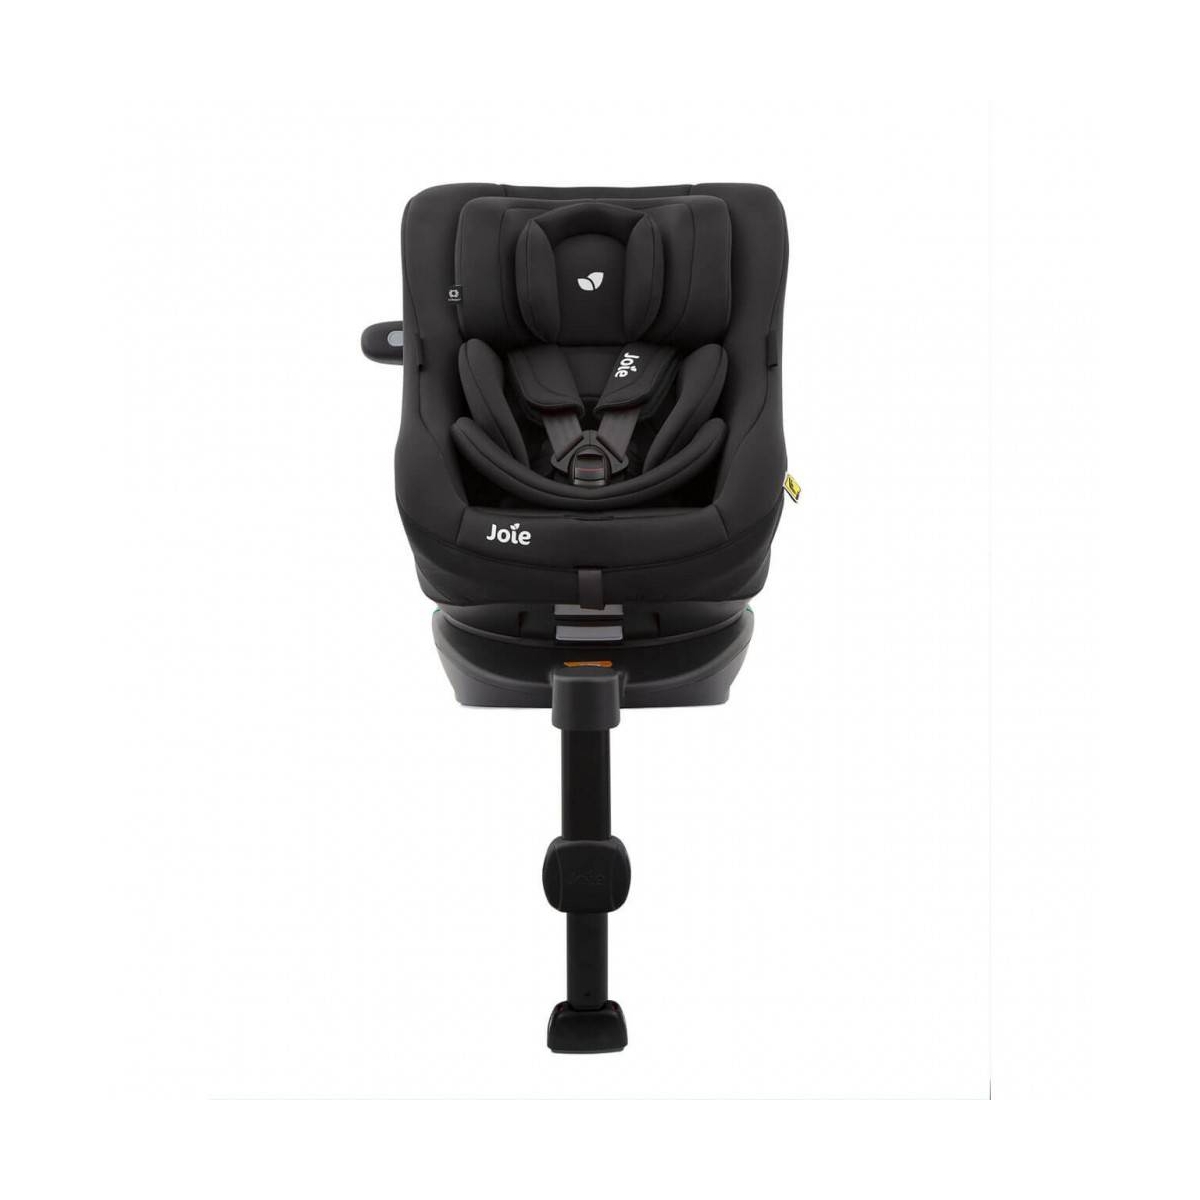 Joie Spin 360 GTI i-Size 0+/1 Car Seat